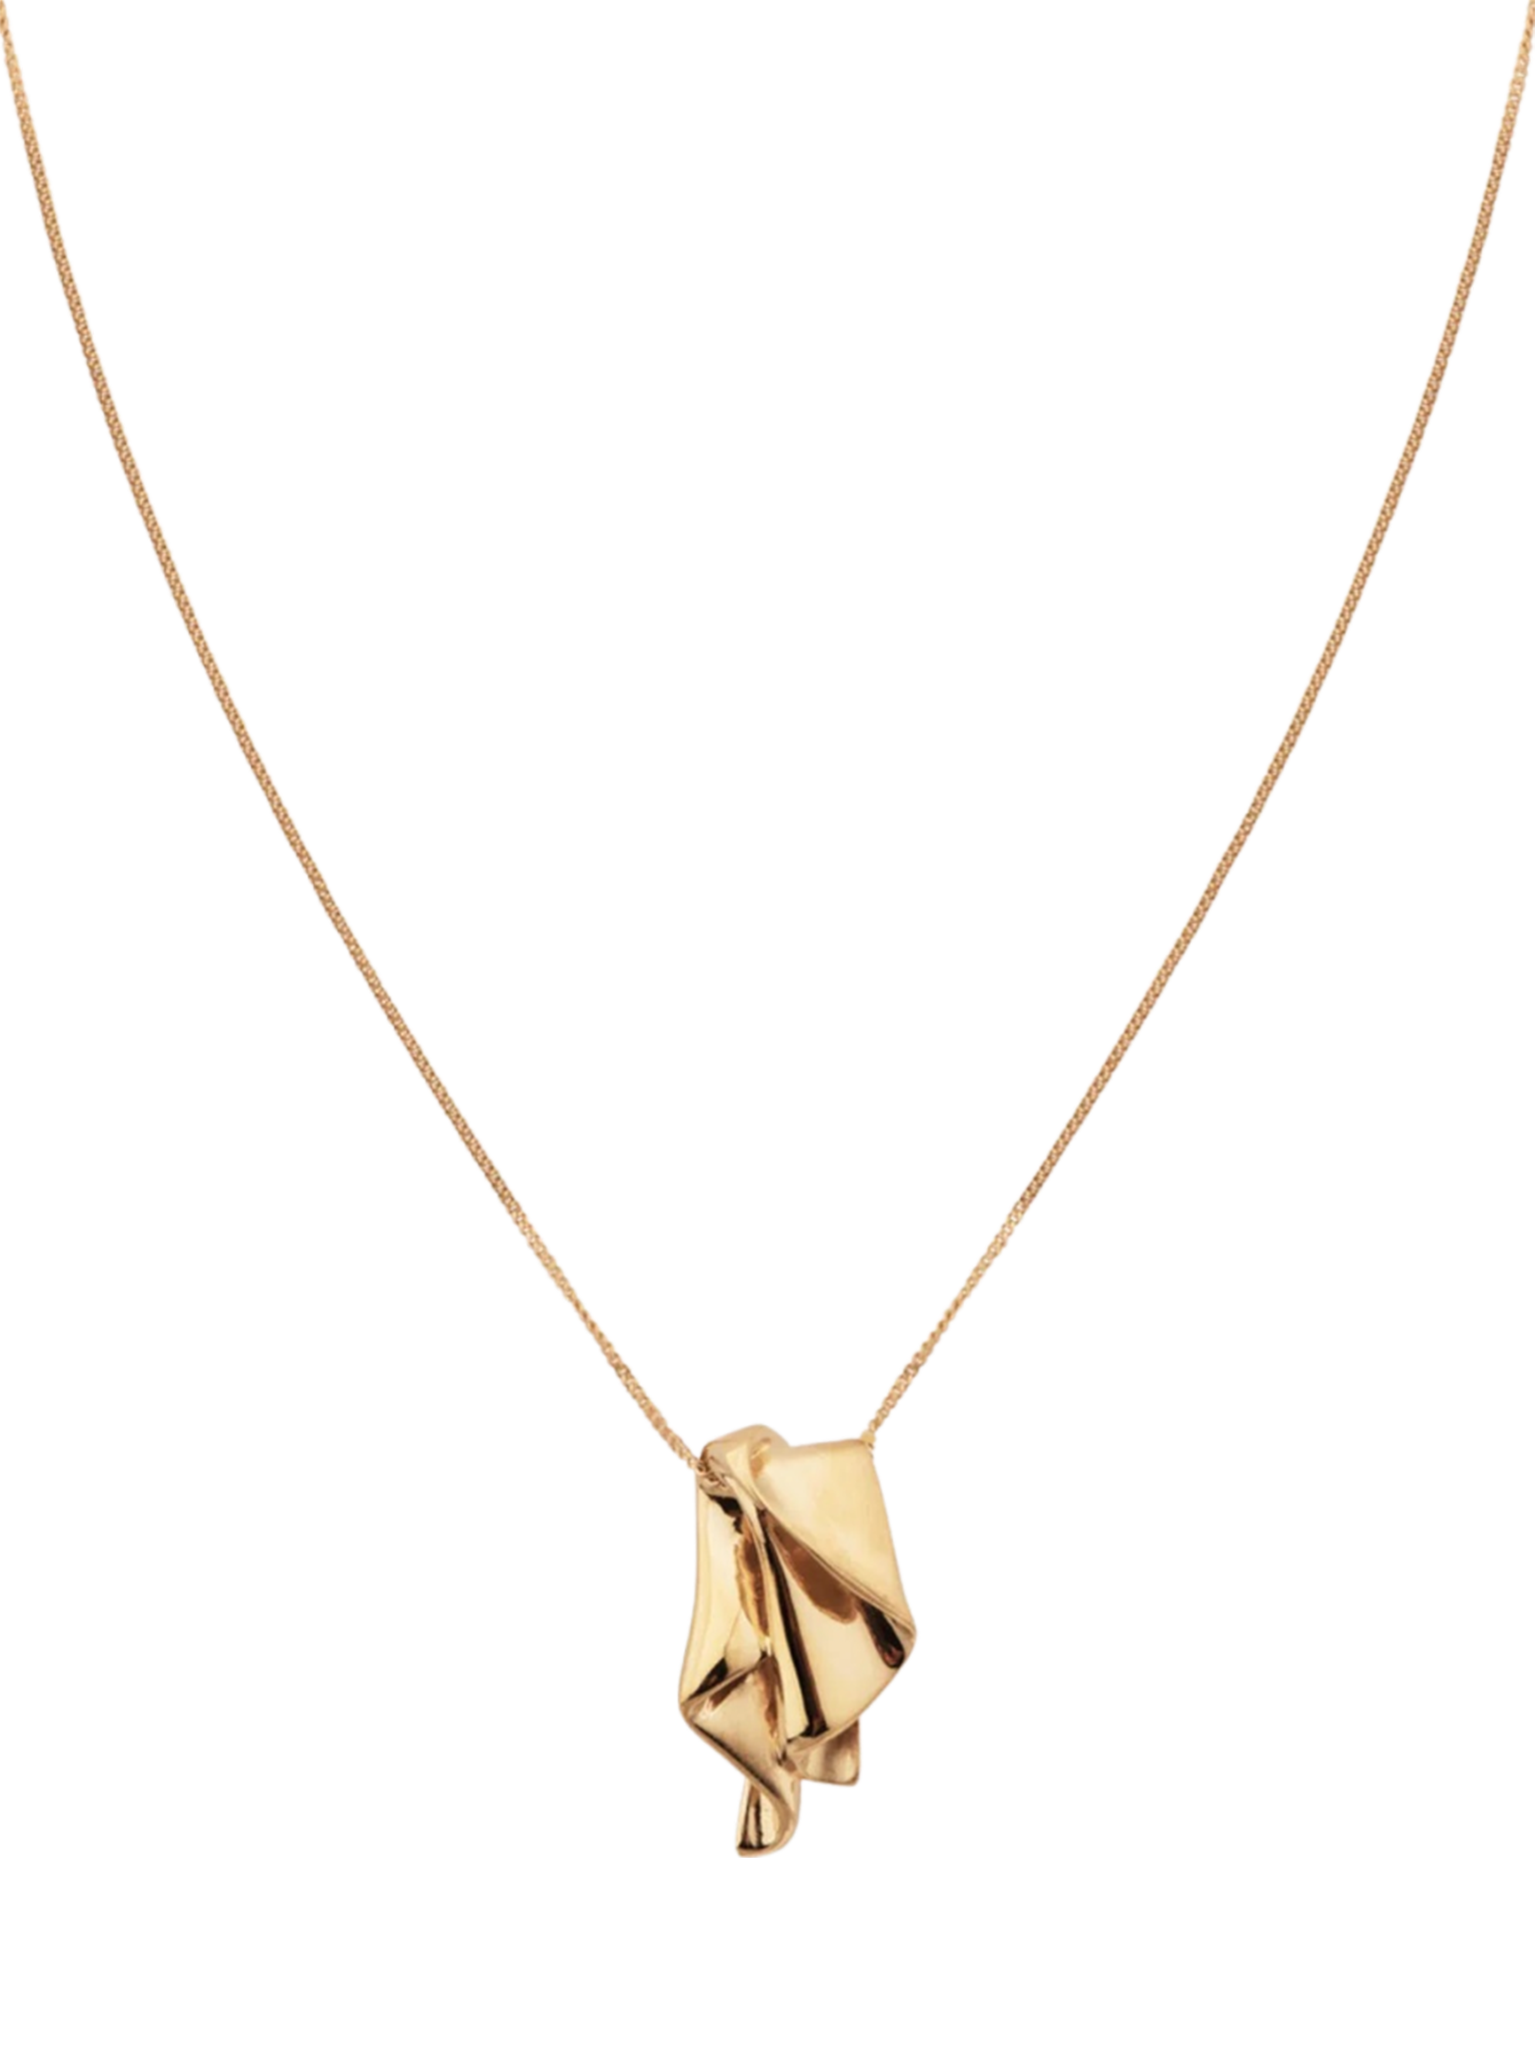 The second great cowboy strike necklace